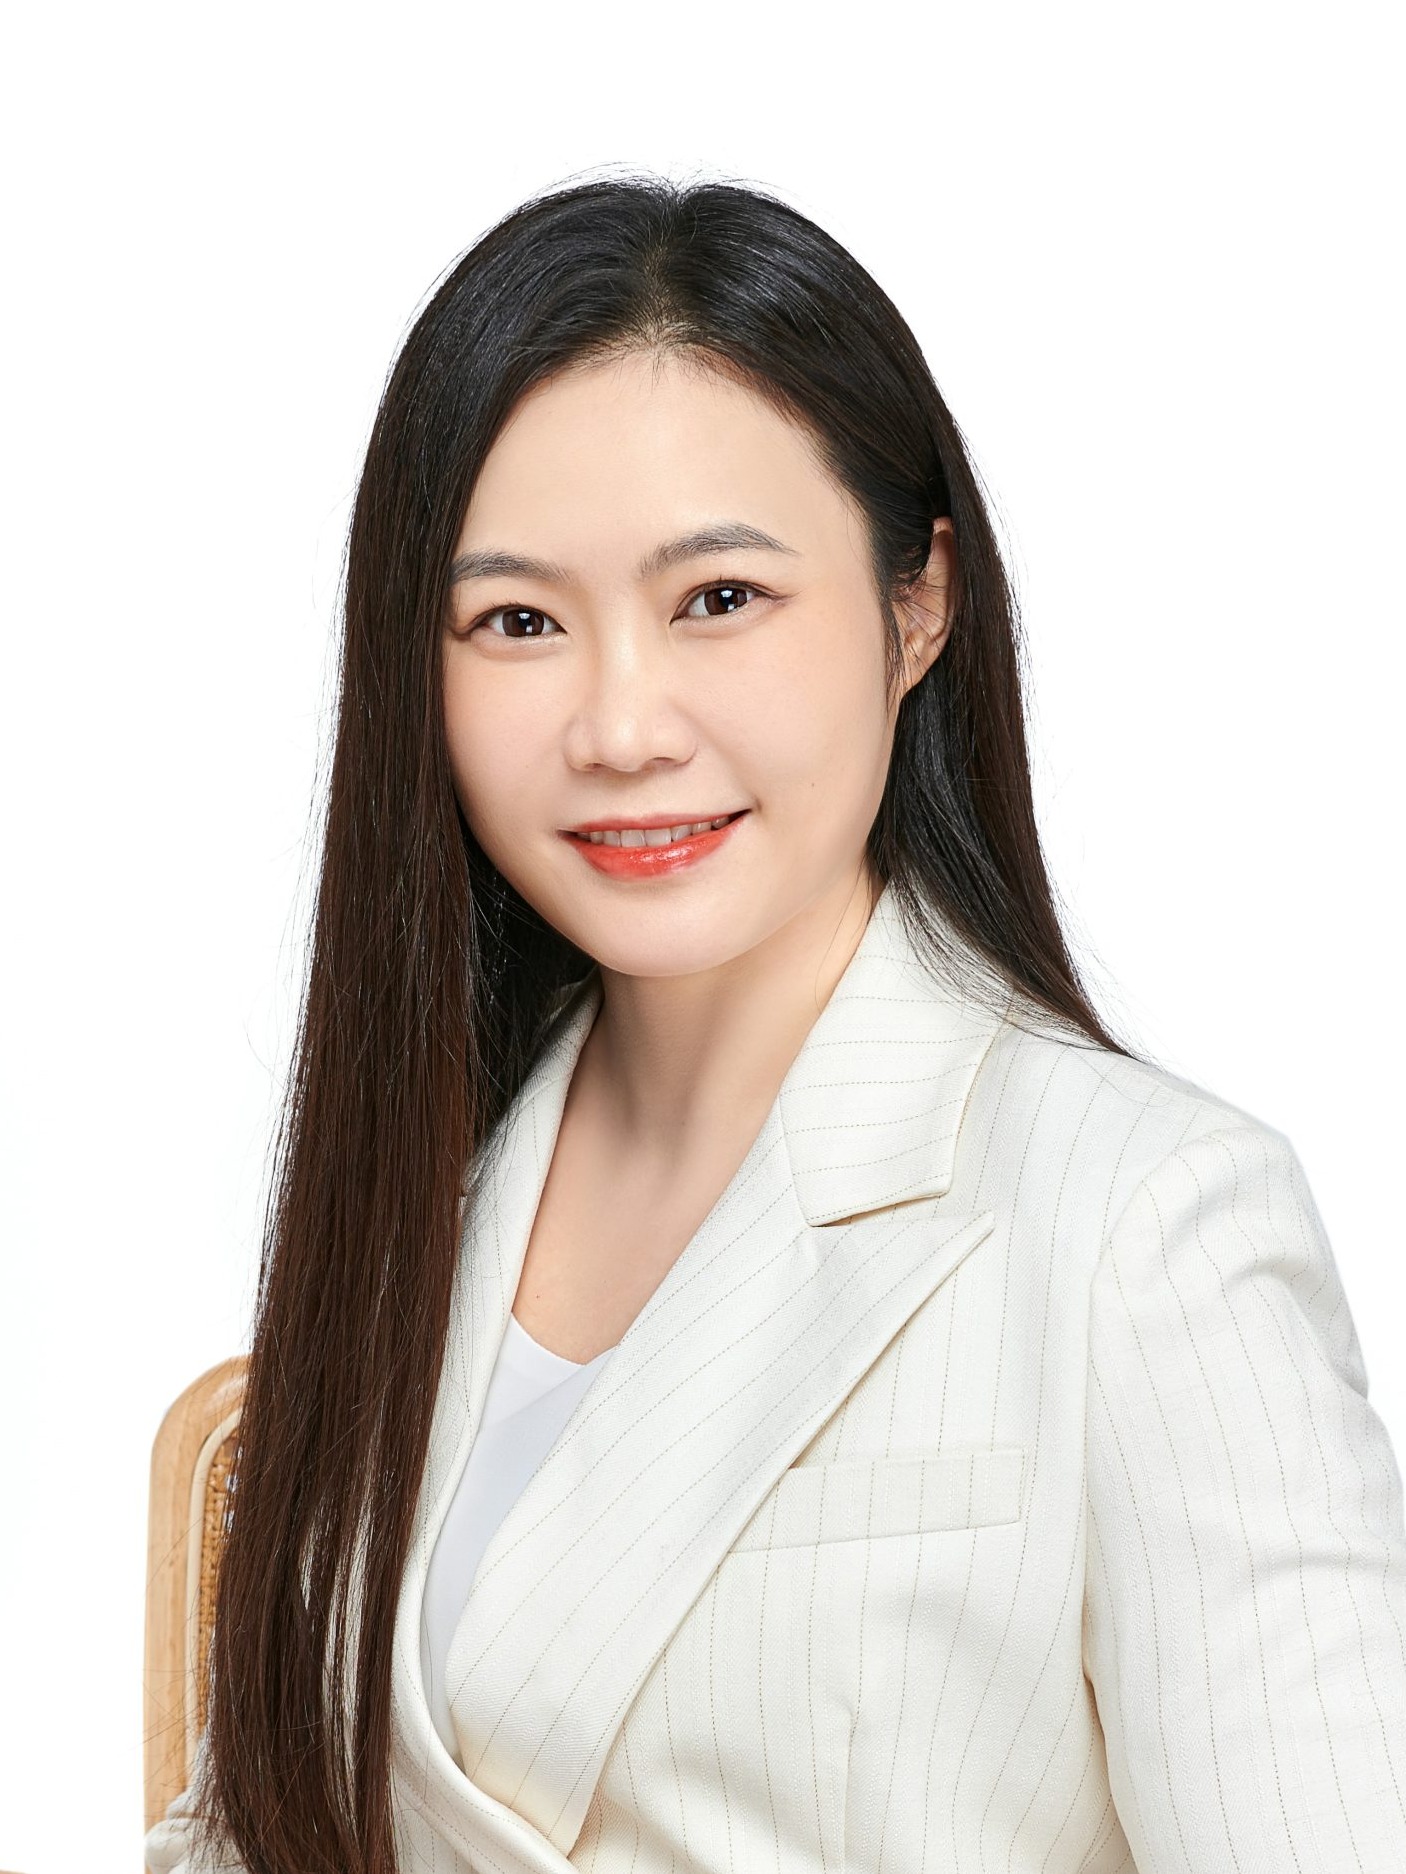 Ms Lesley Gong